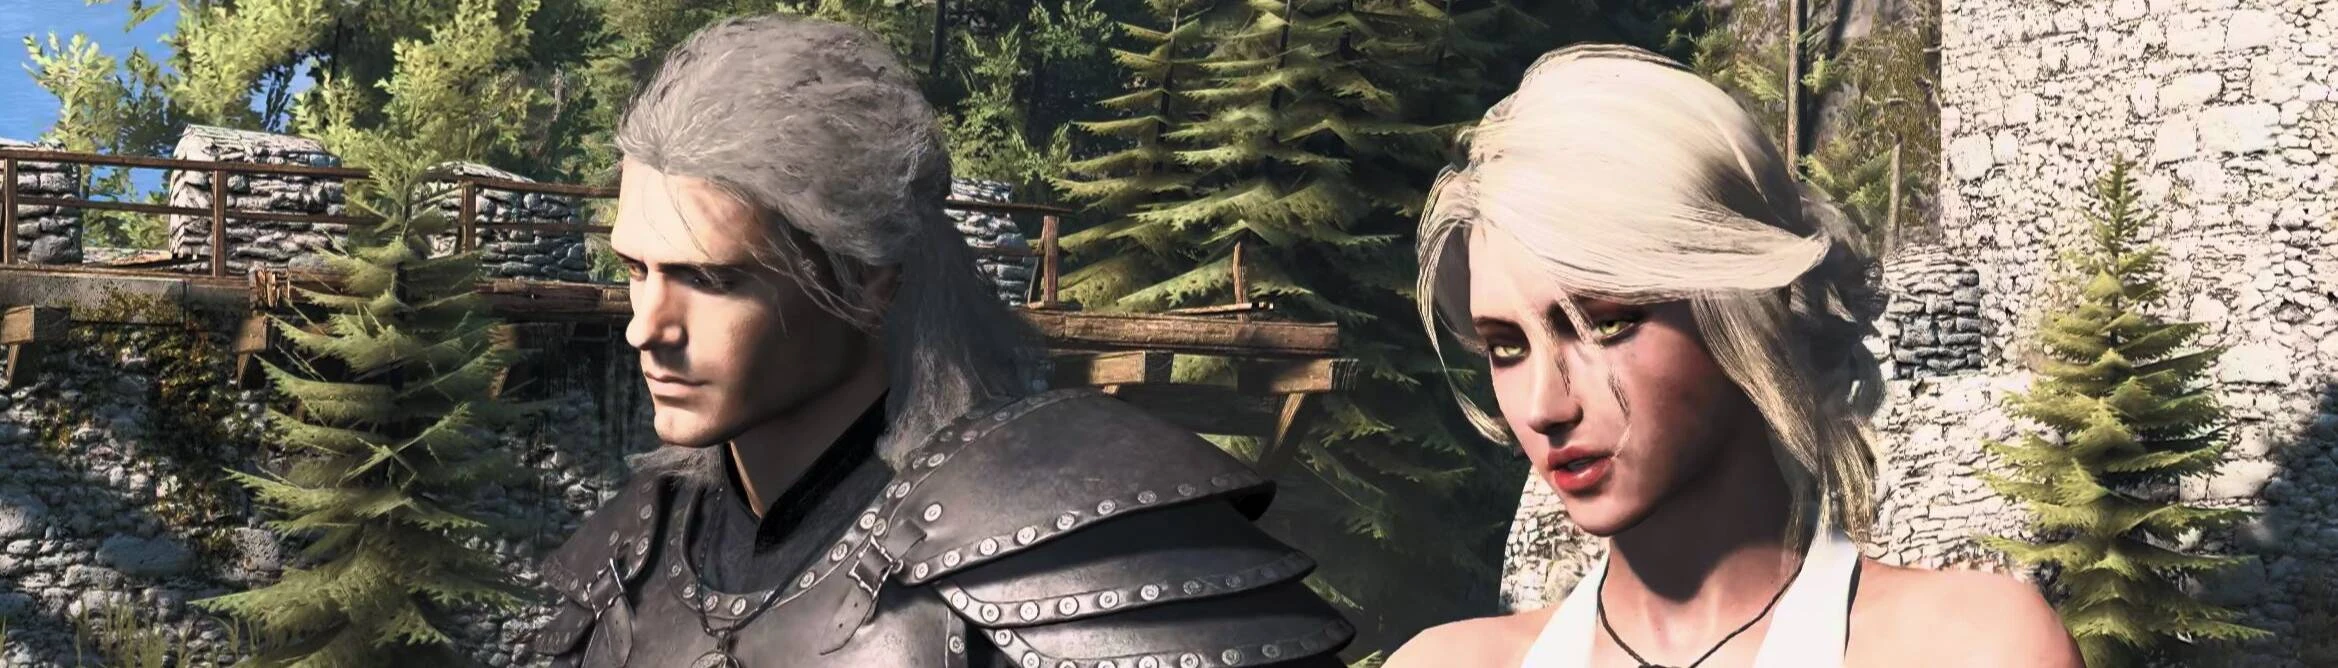 How I Afflicted Geralt With The Witcher 3's Worst Curse Imaginable